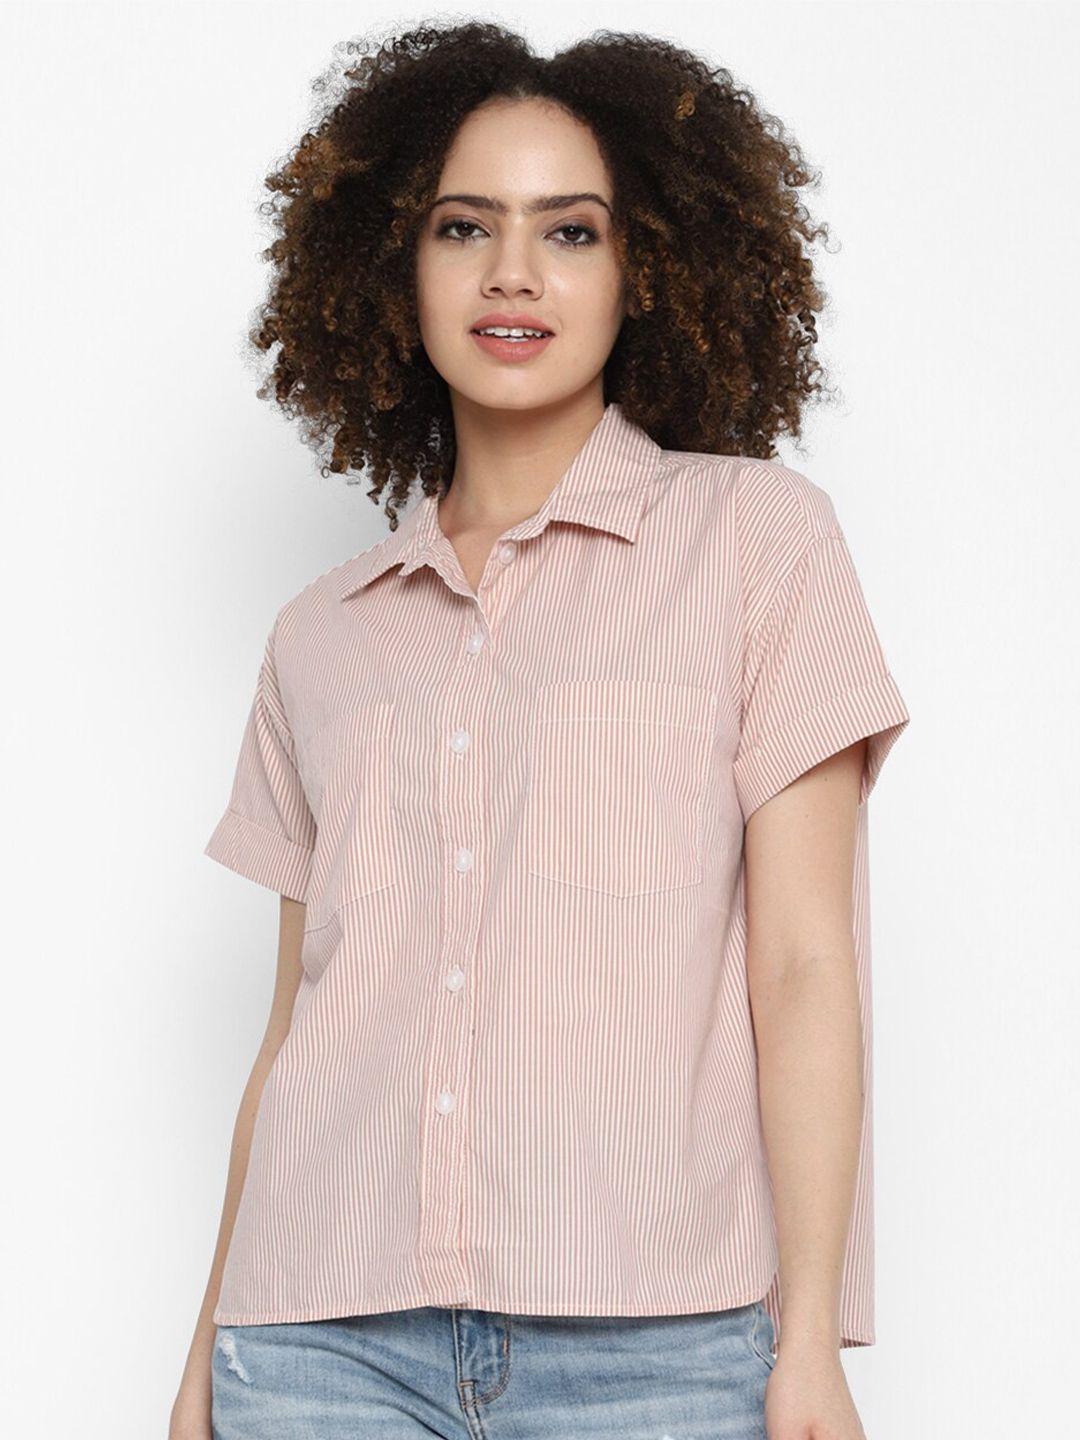 american-eagle-outfitters-women-pink-striped-casual-shirt